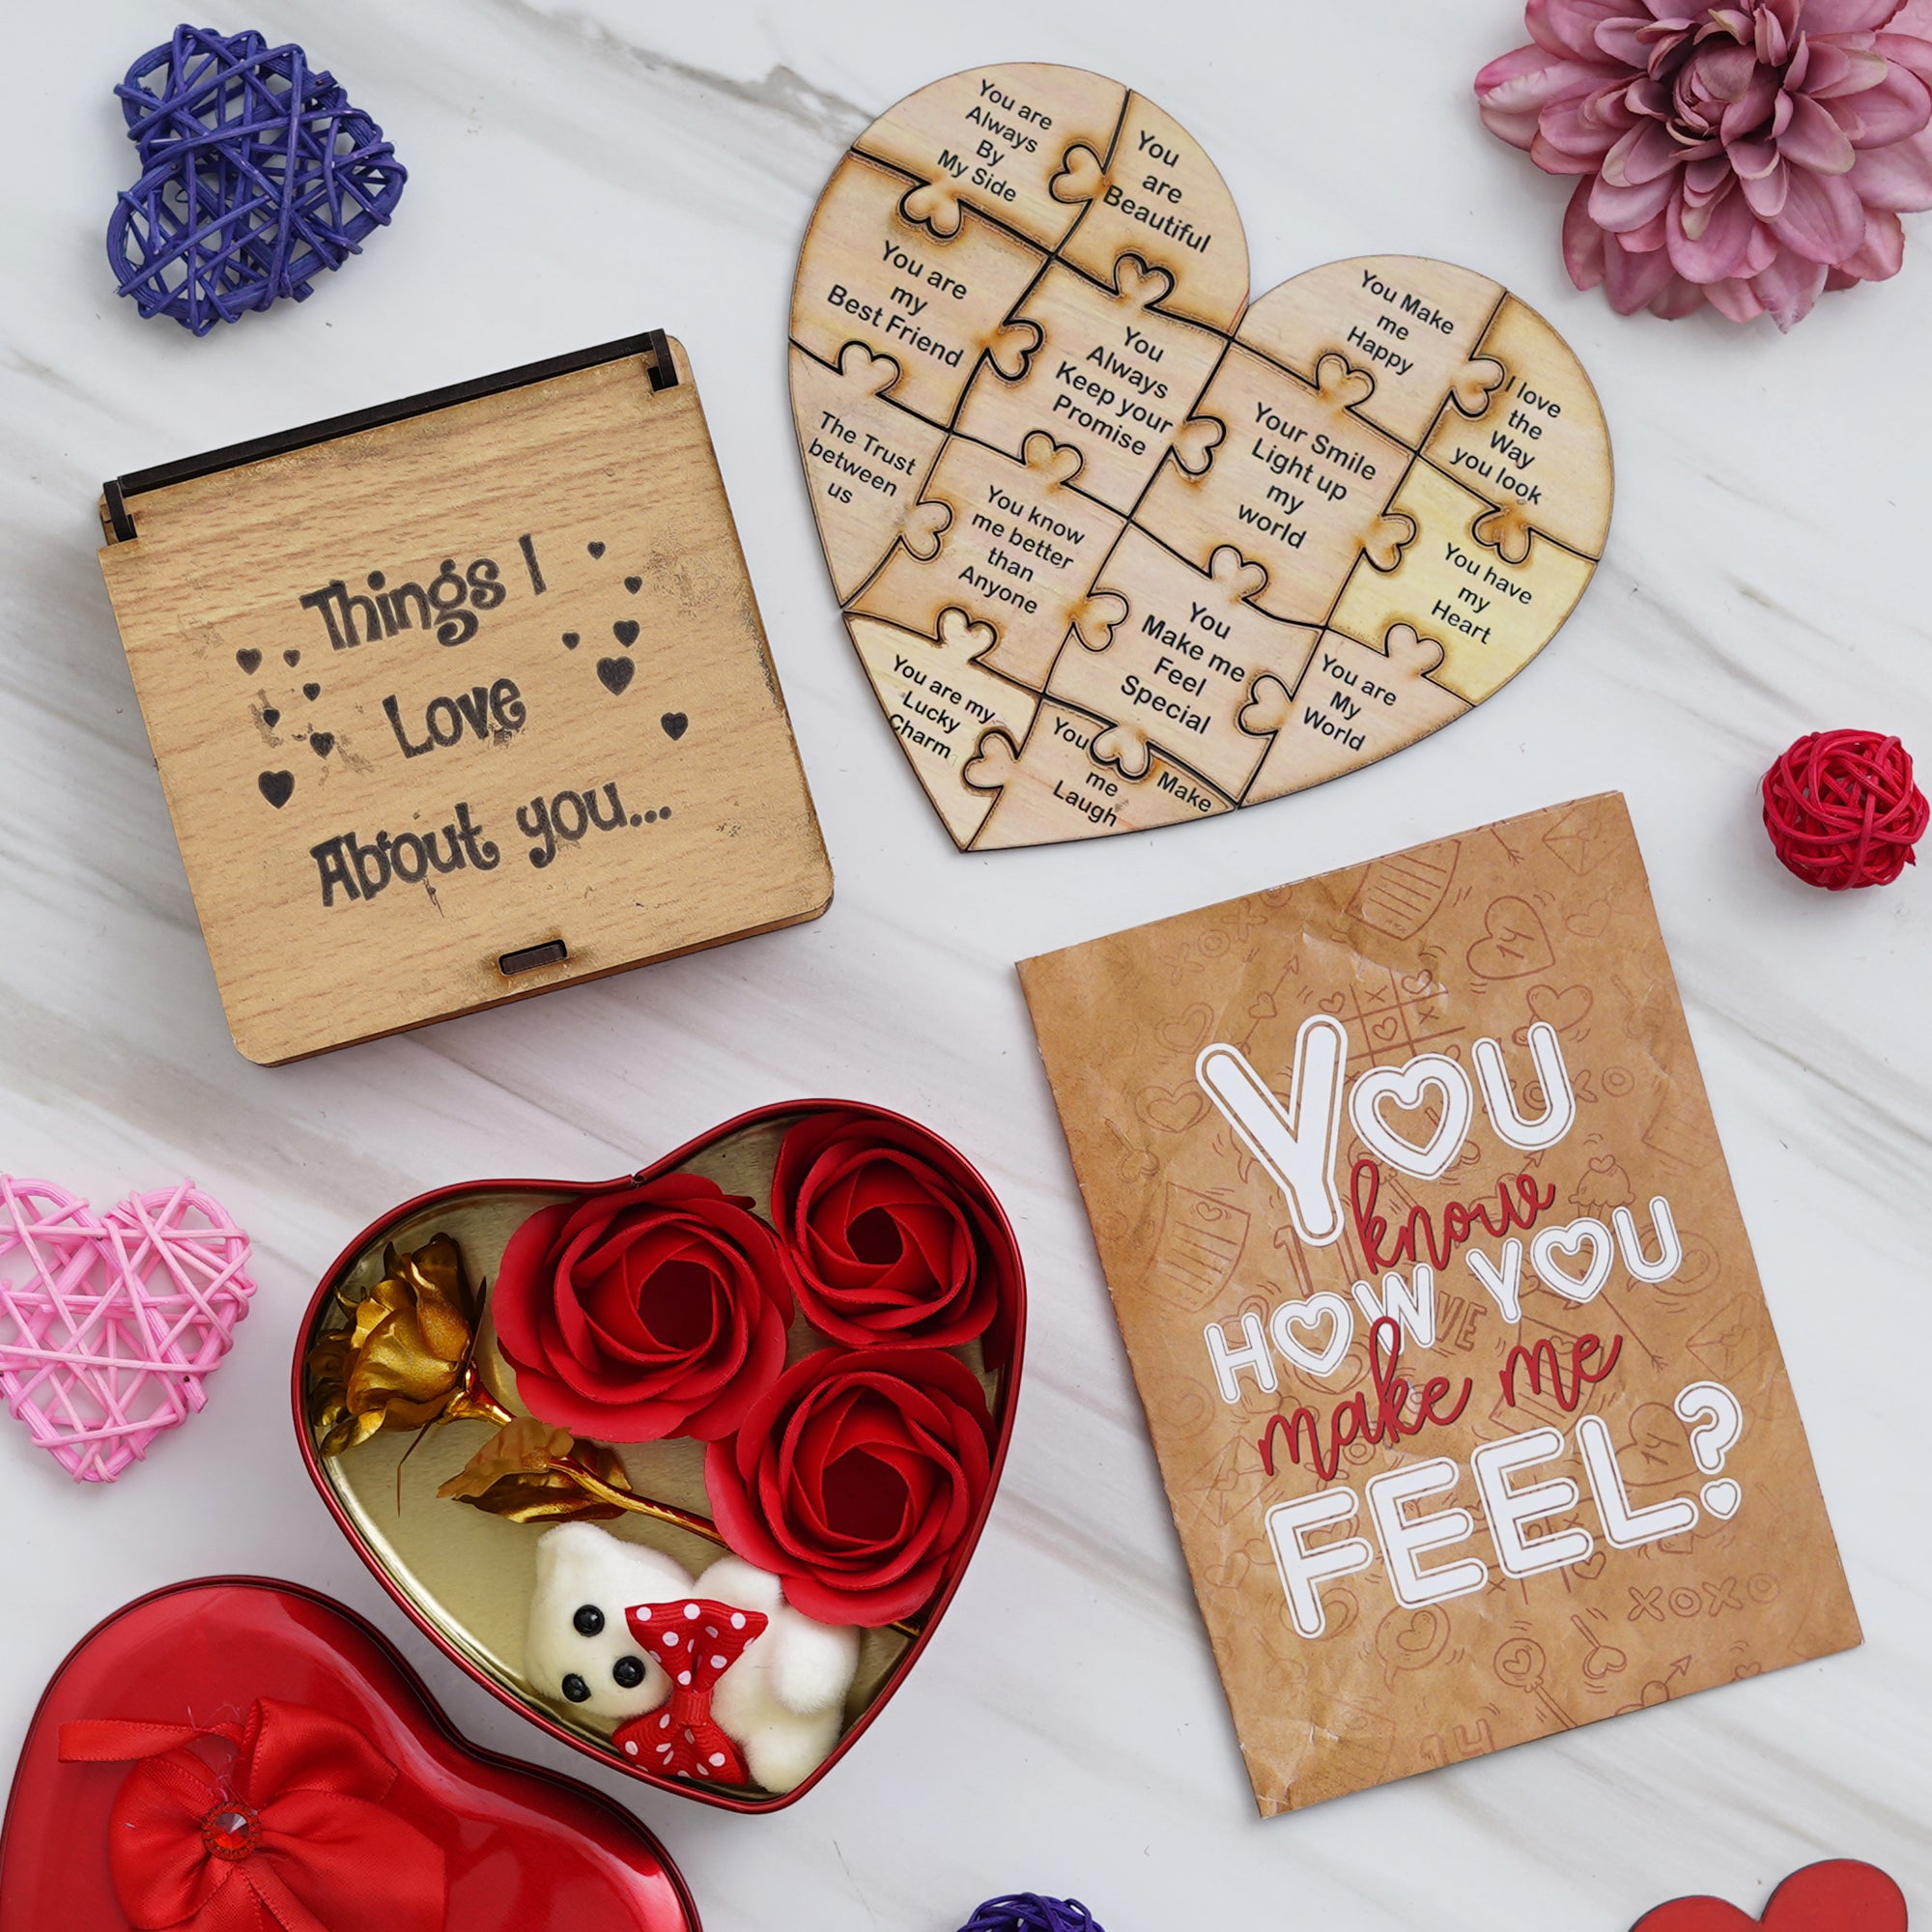 Valentine Combo of Card, "Things I Love About You" Puzzle Wooden Gift Set, Red Heart Shaped Gift Box